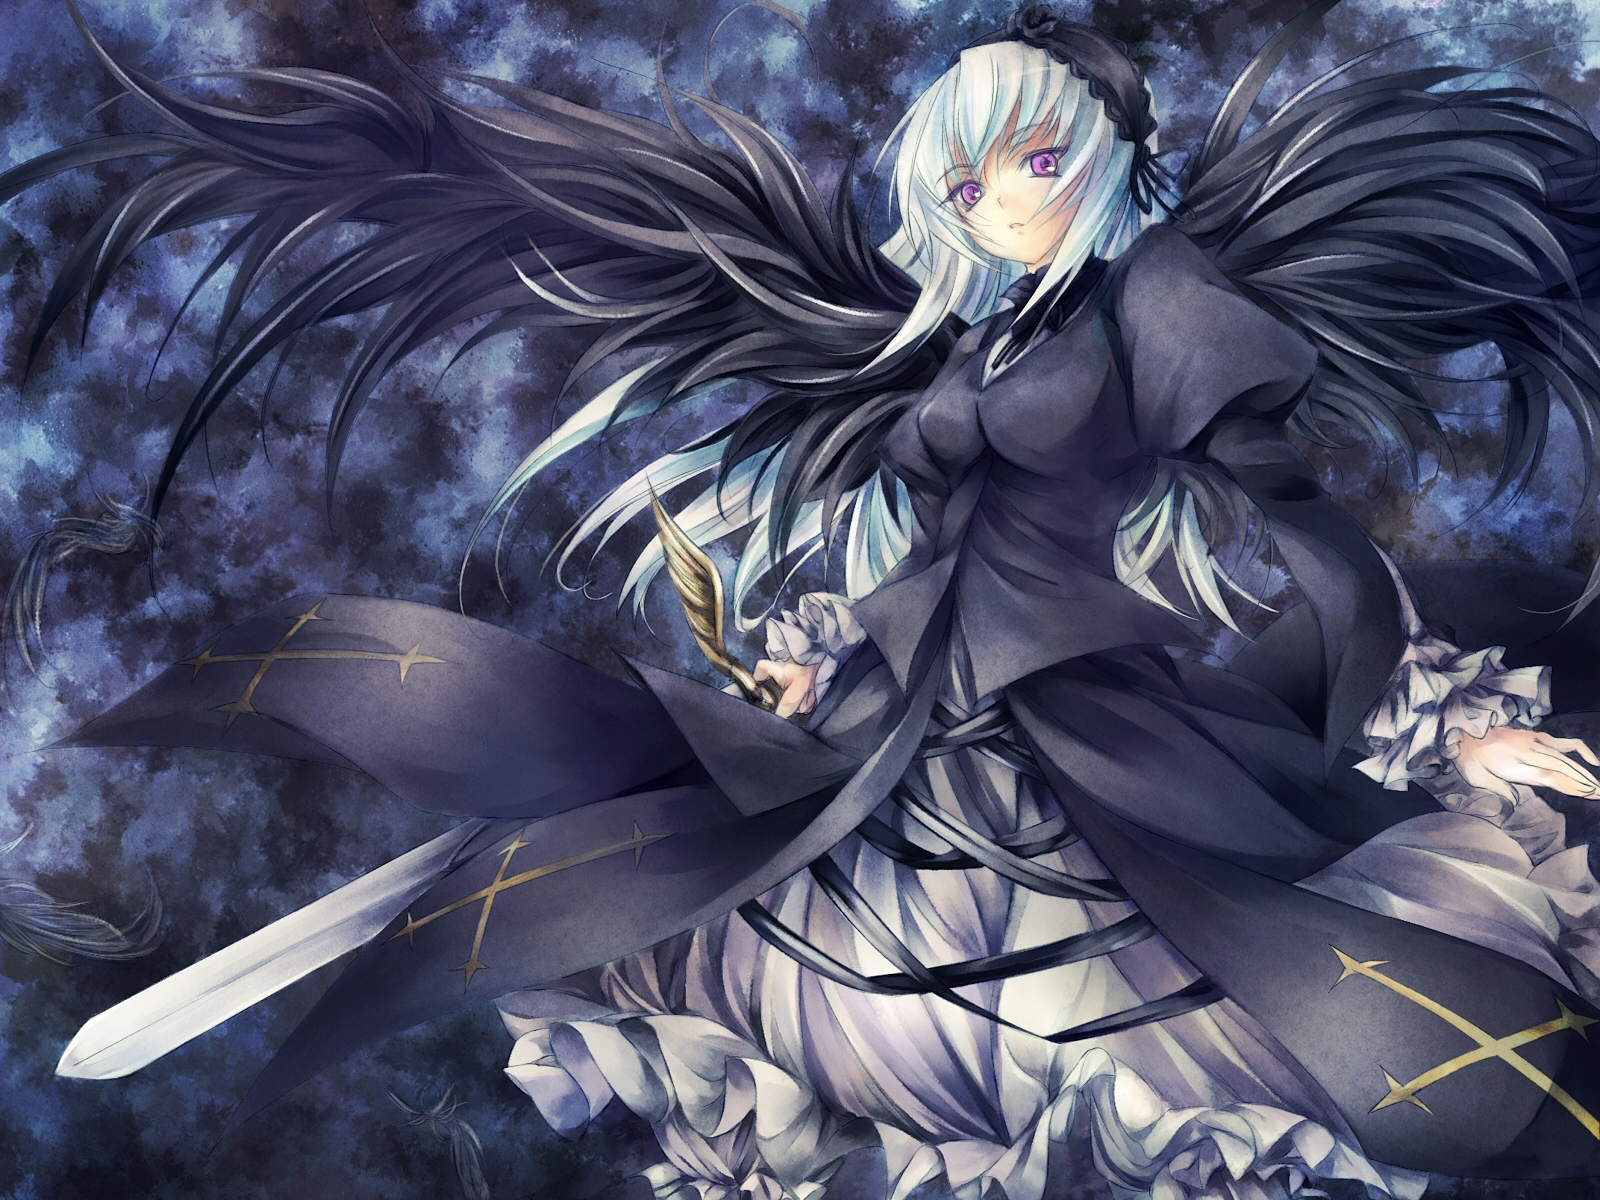 Suigintou, a character from Rozen Maiden anime, in a captivating pose.